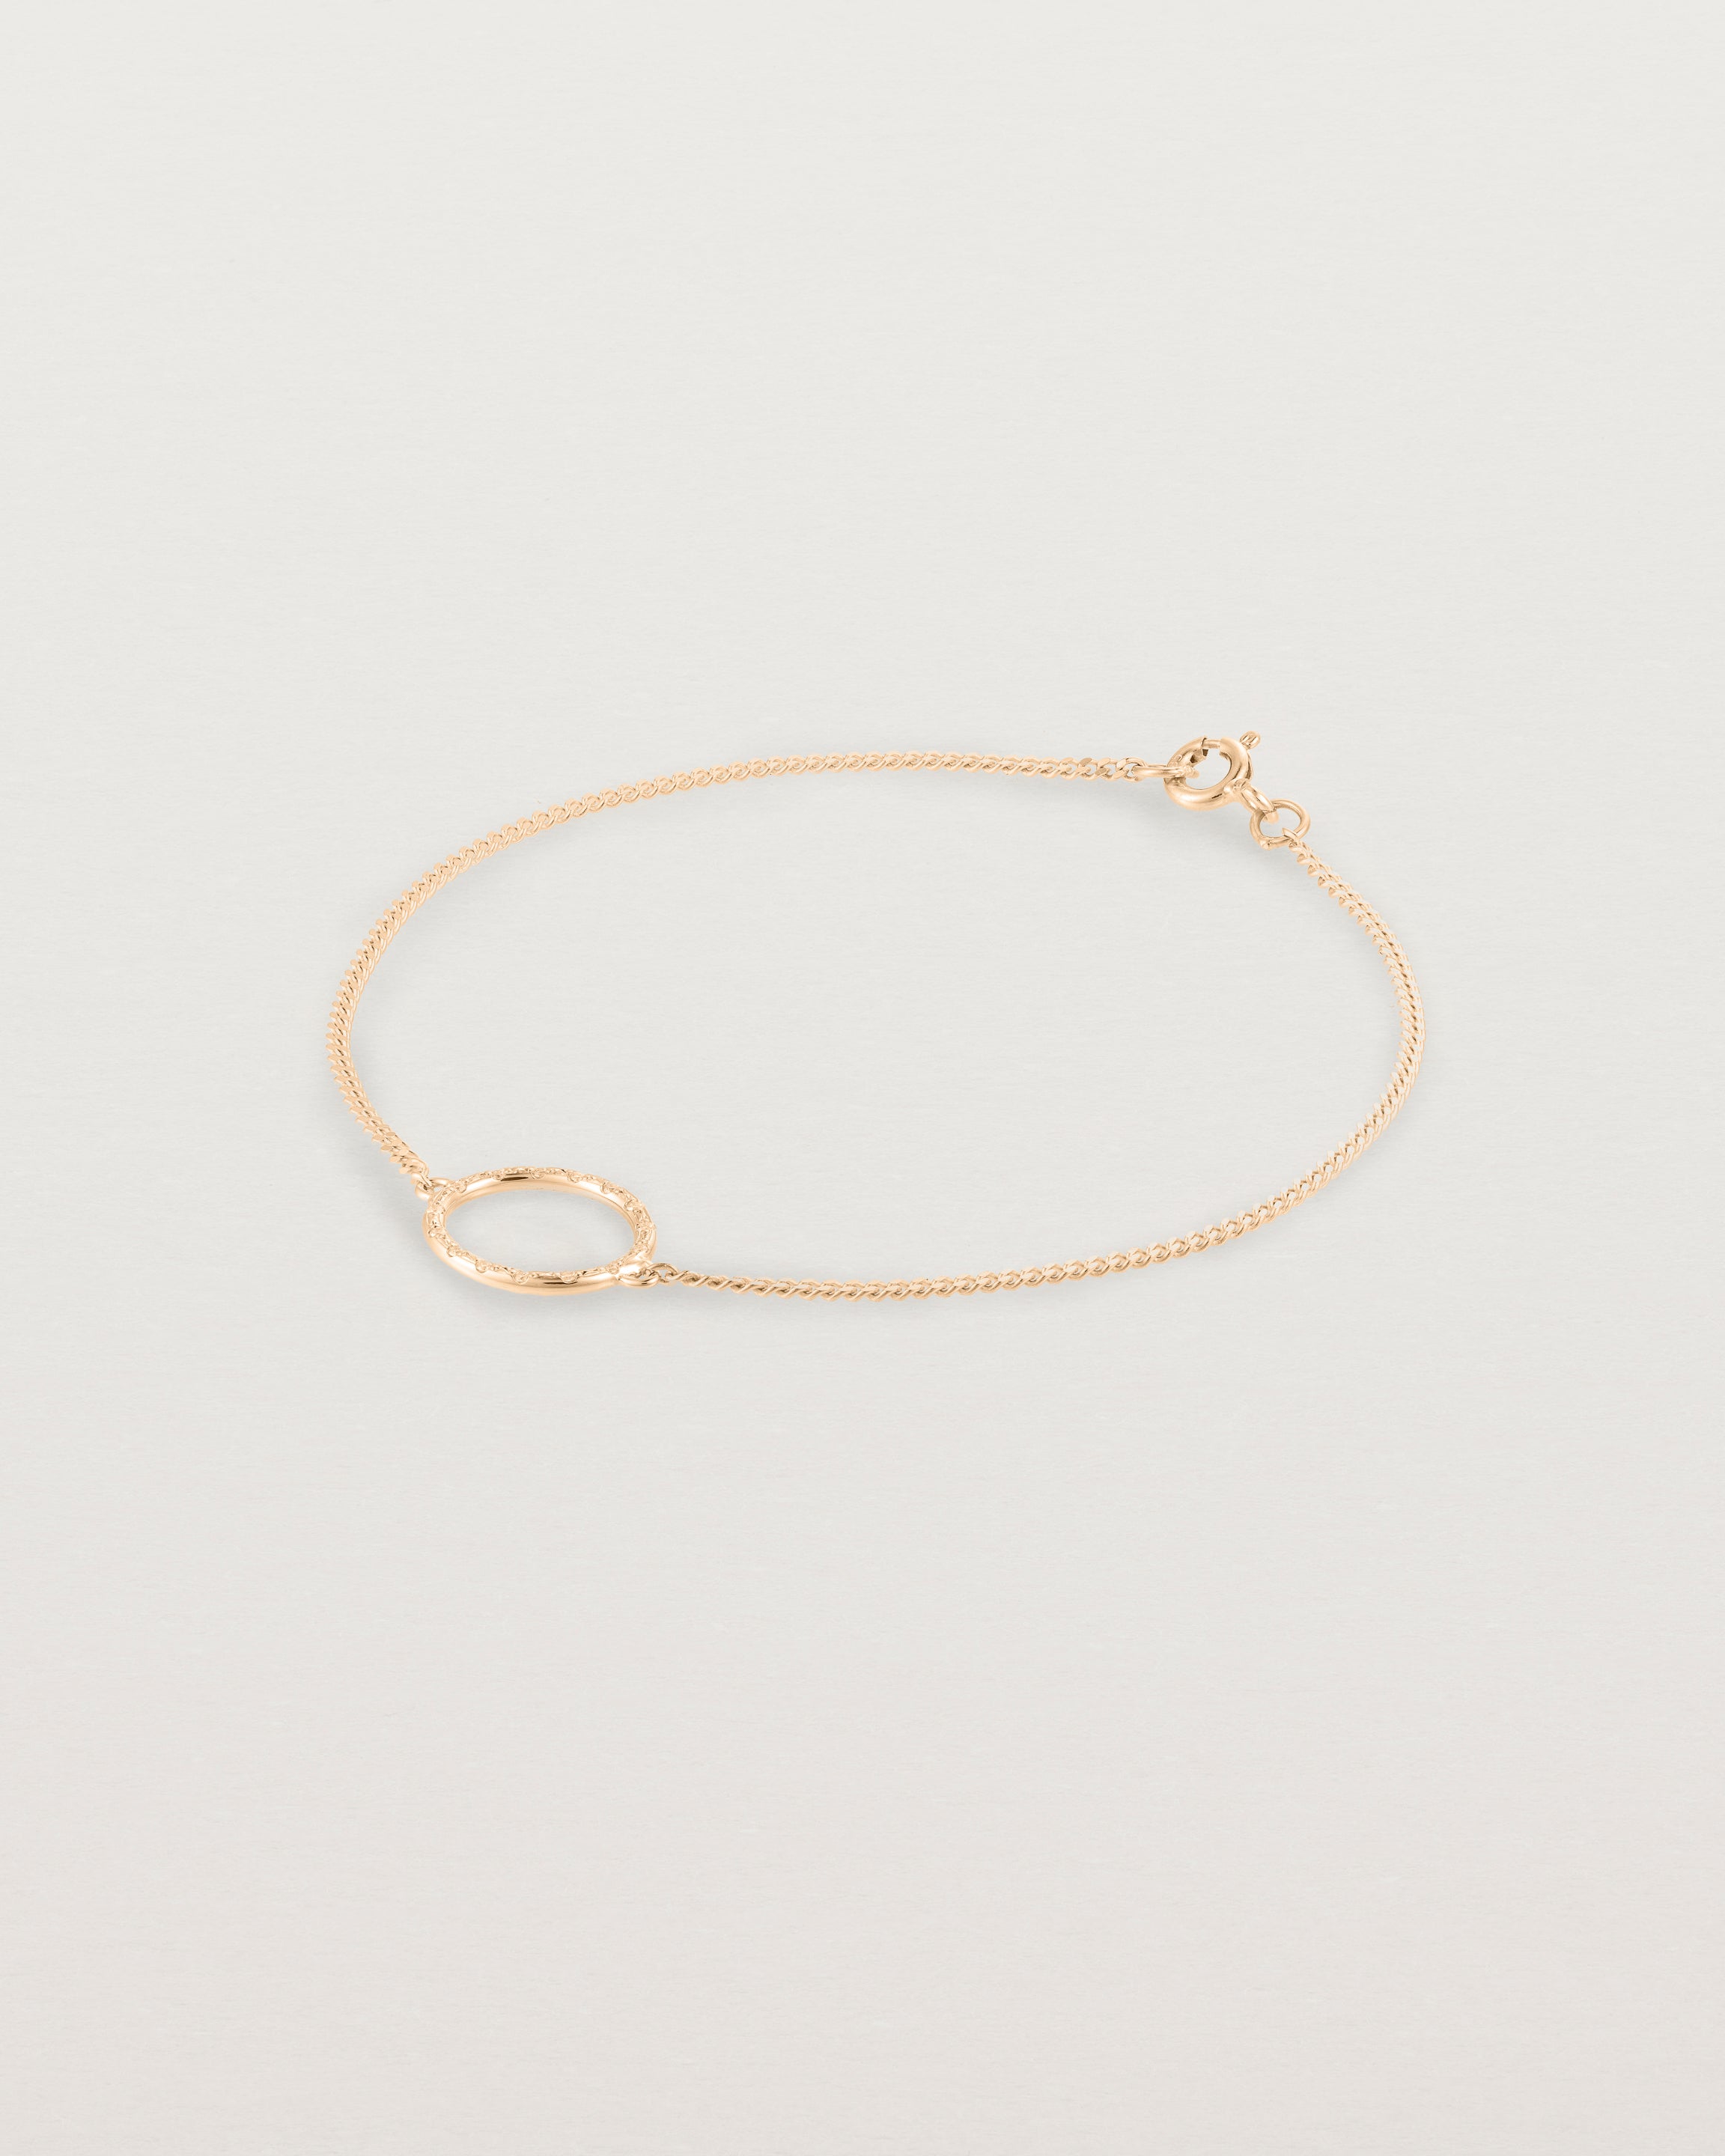 A rose gold chain bracelet featuring a circle set with small white diamonds